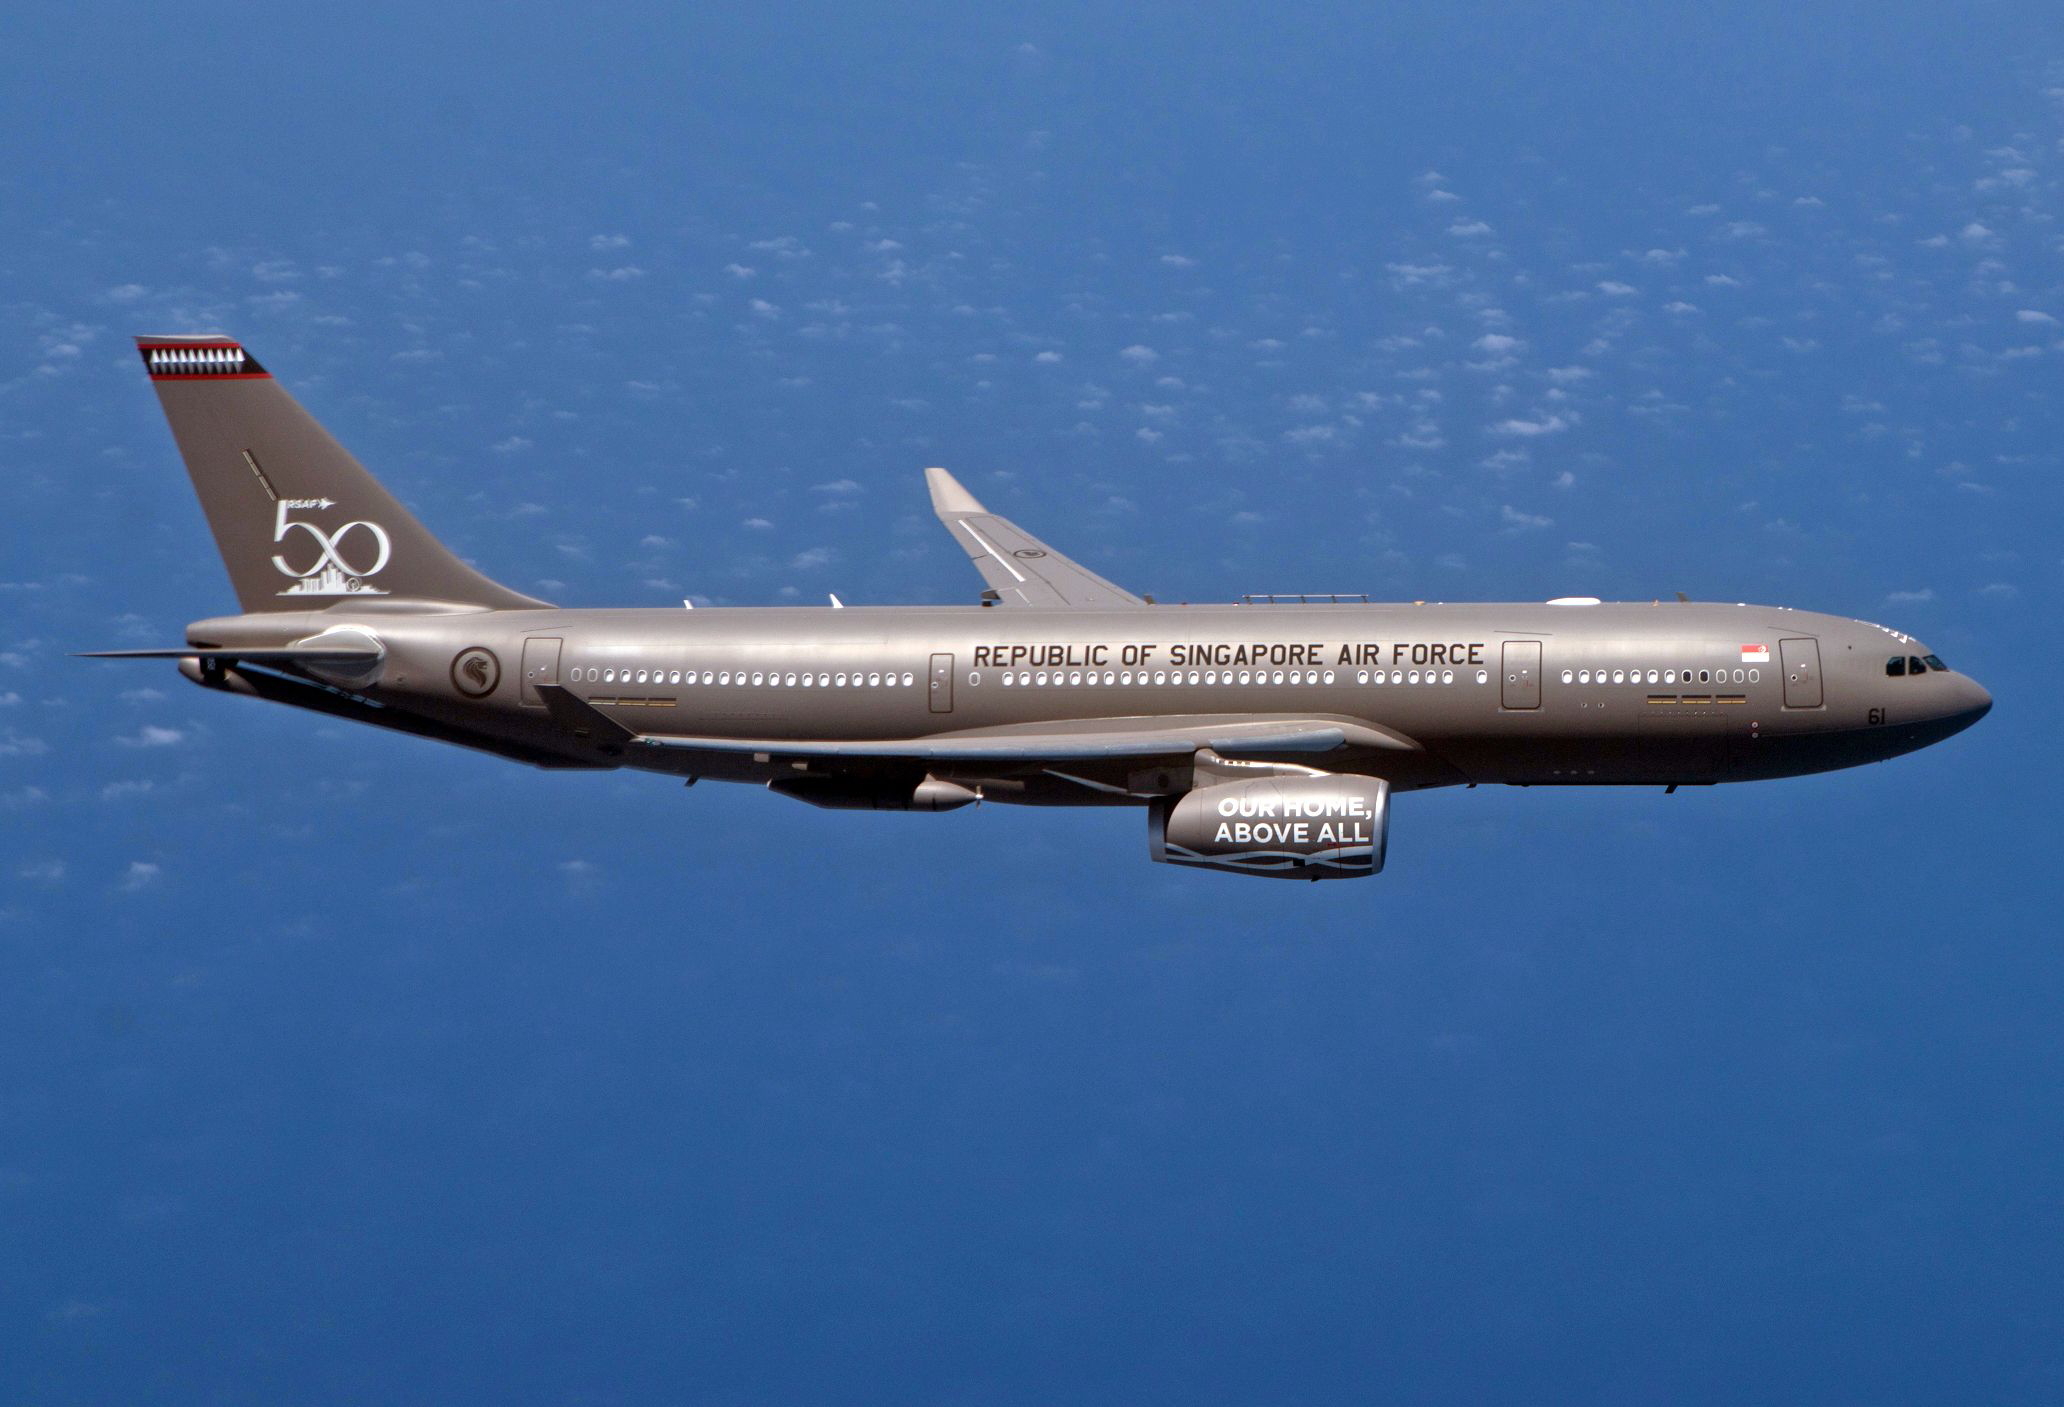 Republic of Singapore Air Force's Airbus A330 MRTT. Click to enlarge.